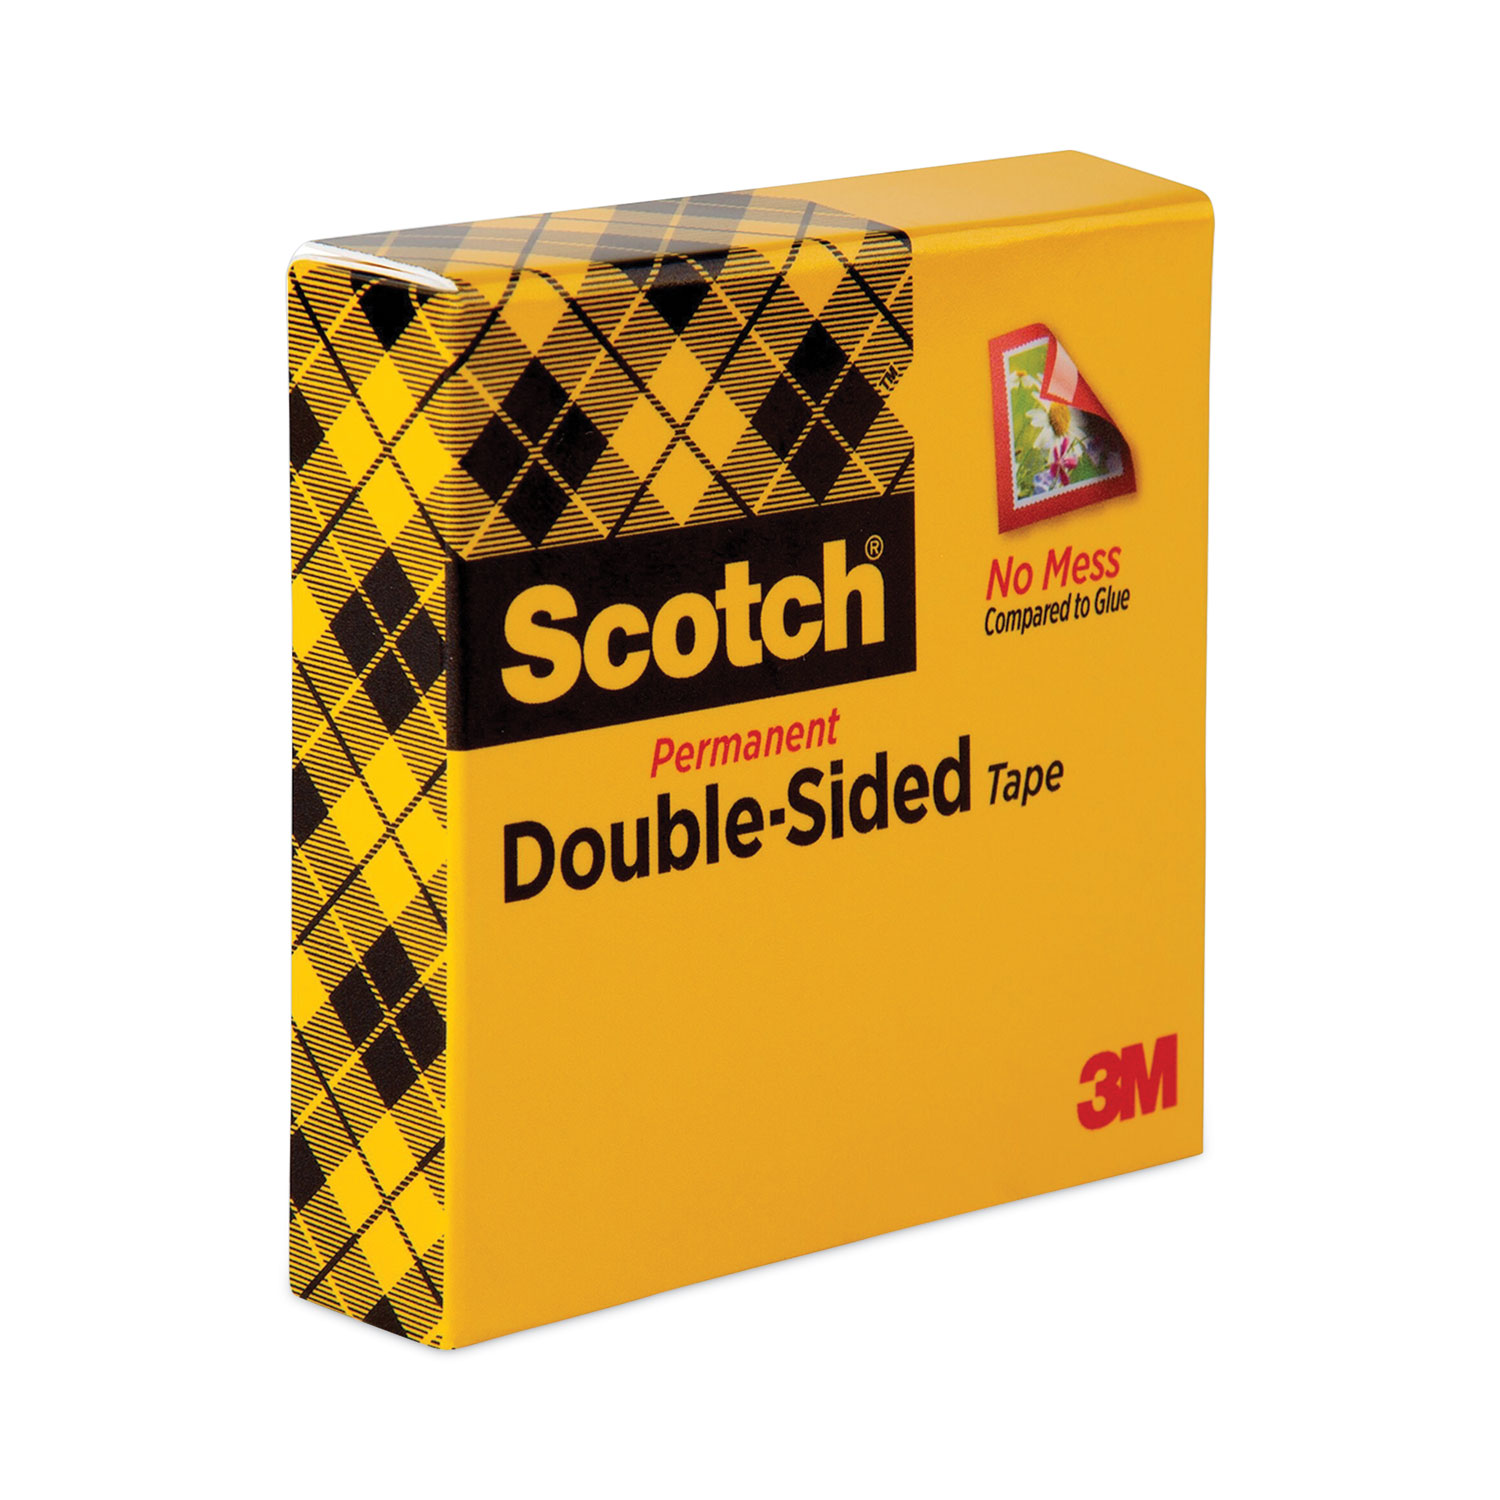 Scotch® Double Sided Tape 665, 1/2 in x 900 in, Boxed, 72 Rolls/Carton